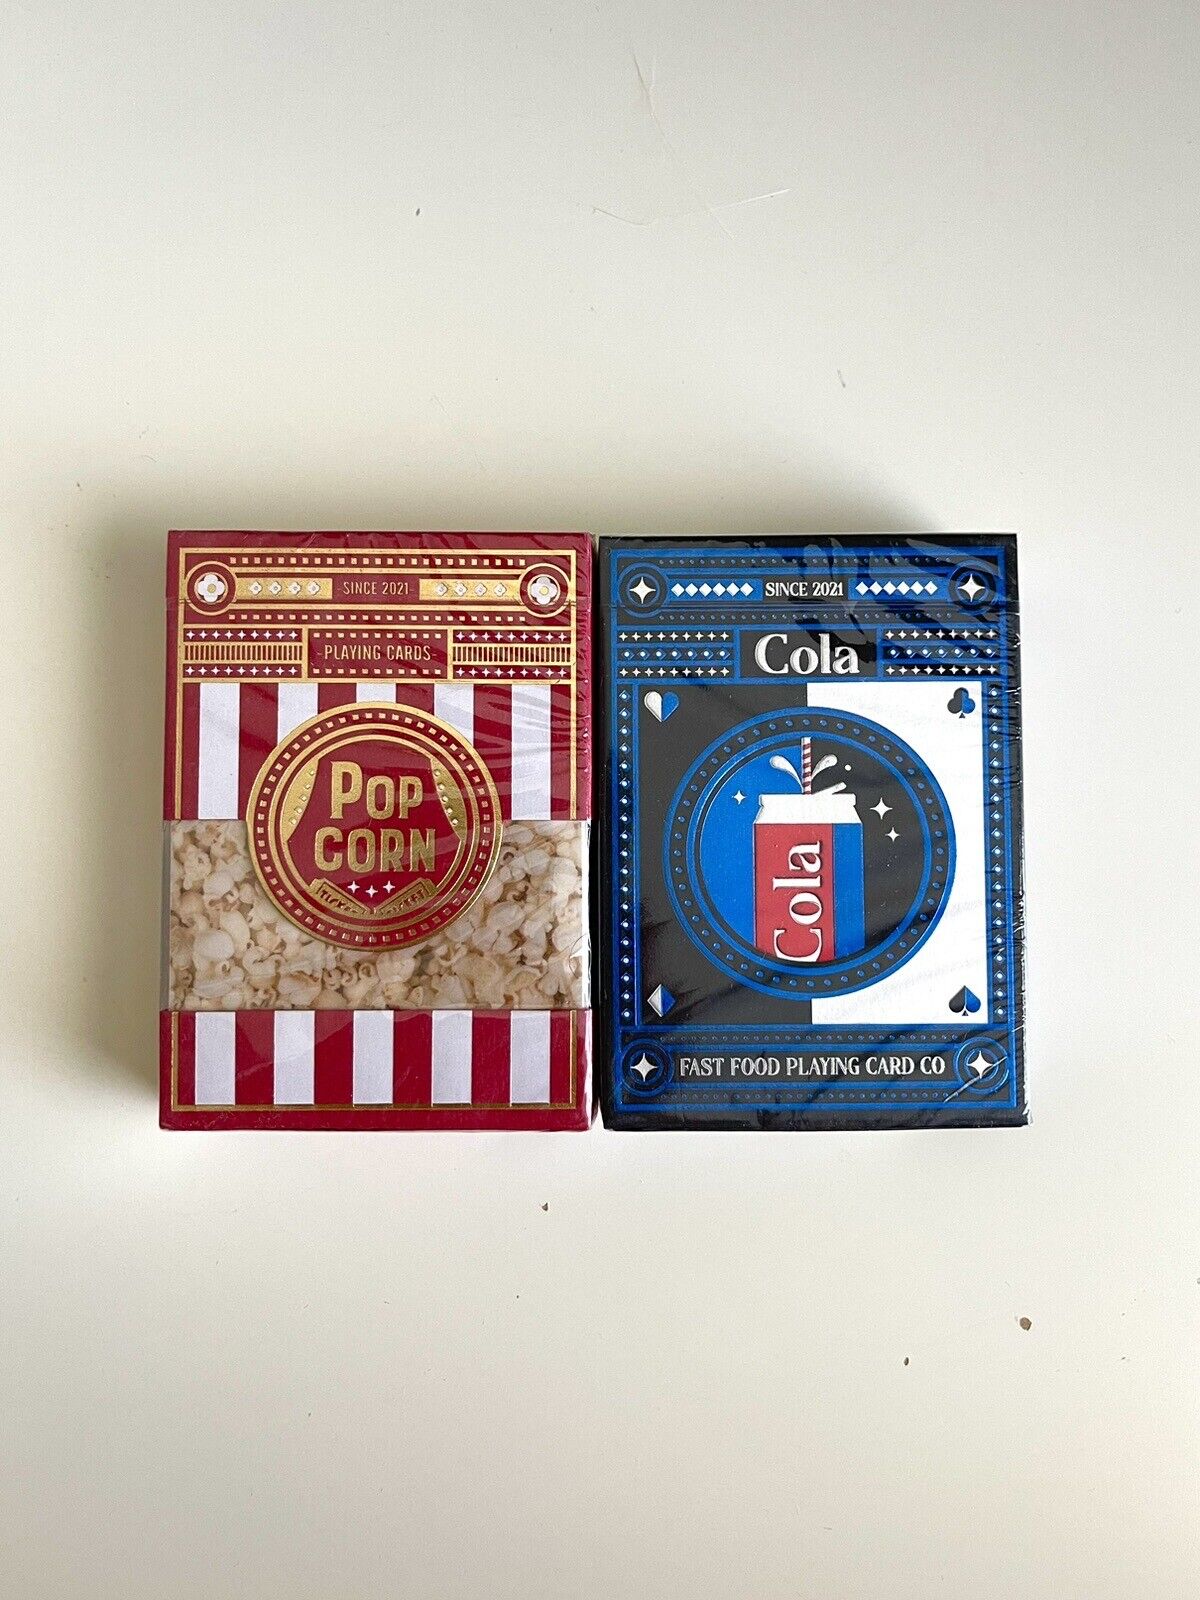 2 of  Popcorn And Cola Playing Cards (rare, Fontaine, Dananddave,theory11)